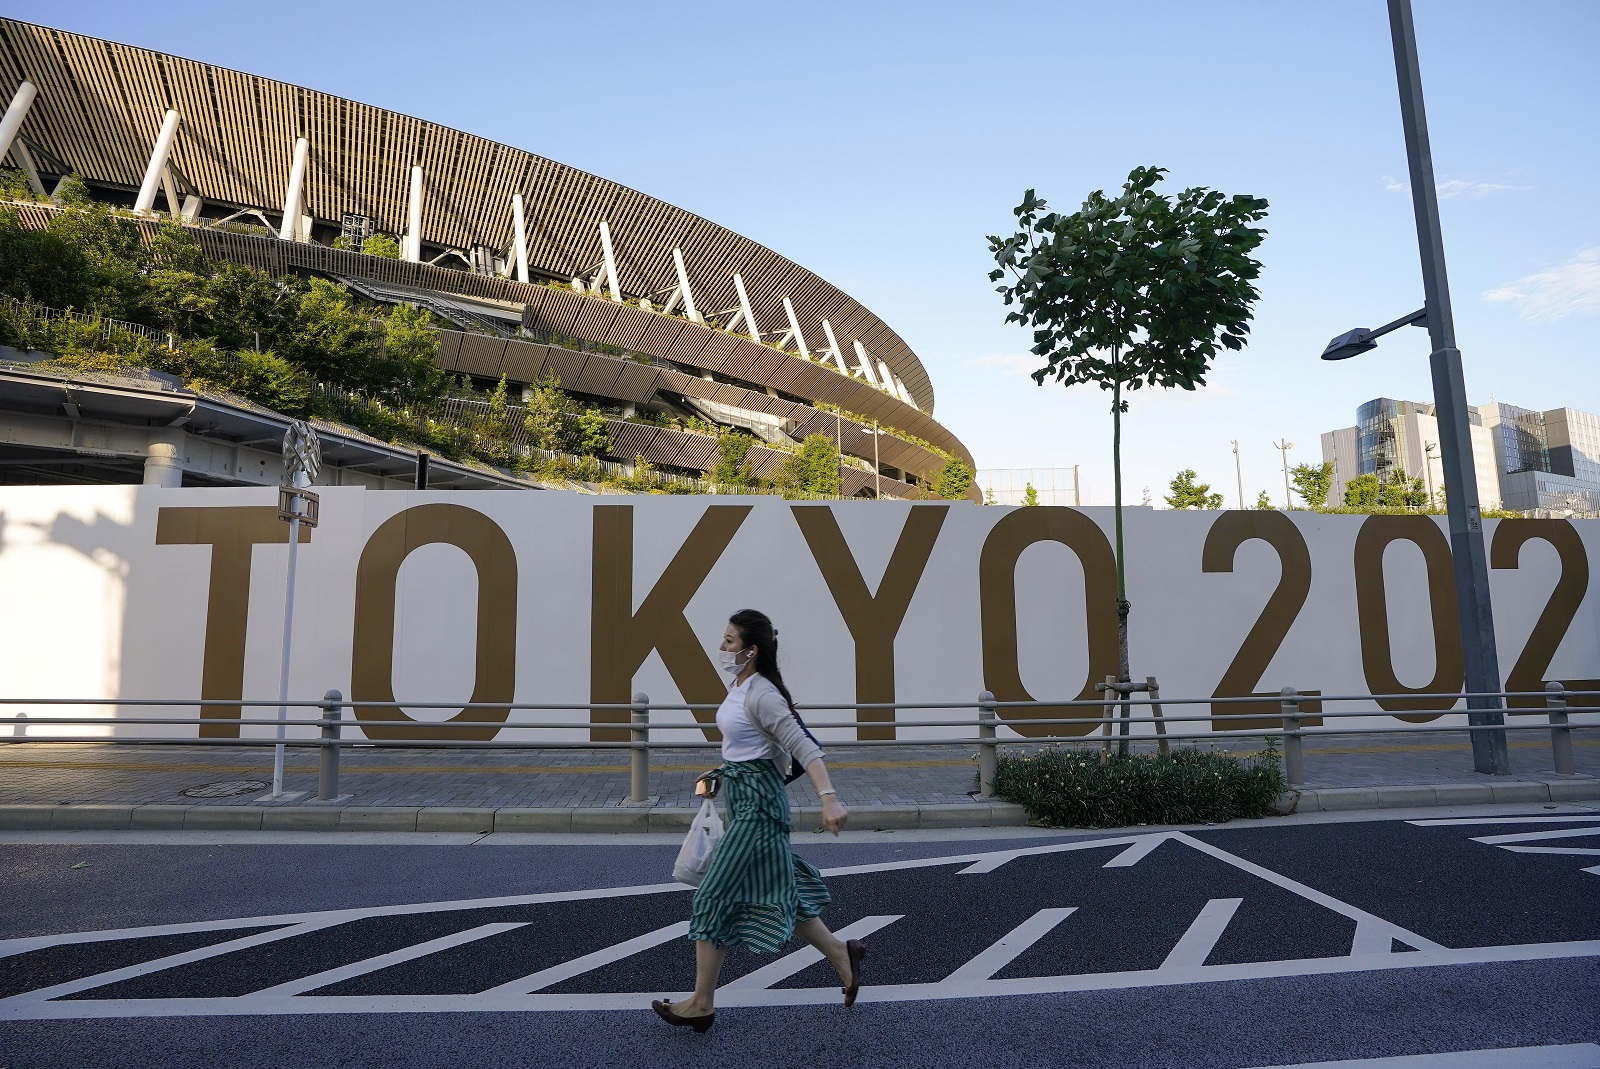 epa09279196 A pedestrian walks past the New National Stadium, or the Olympic Stadium for the Opening Ceremony, Closing Ceremony and Athletics event, in Tokyo, Japan, 17 June 2021, after the Japanese government decided to lift the COVID-19 state of emergency as scheduled to end on 20 June 2021, in nine prefectures including Tokyo. The government also decided to keep restrictions to avoid a rebound of infections before the Tokyo Olympic Games.  EPA/KIMIMASA MAYAMA